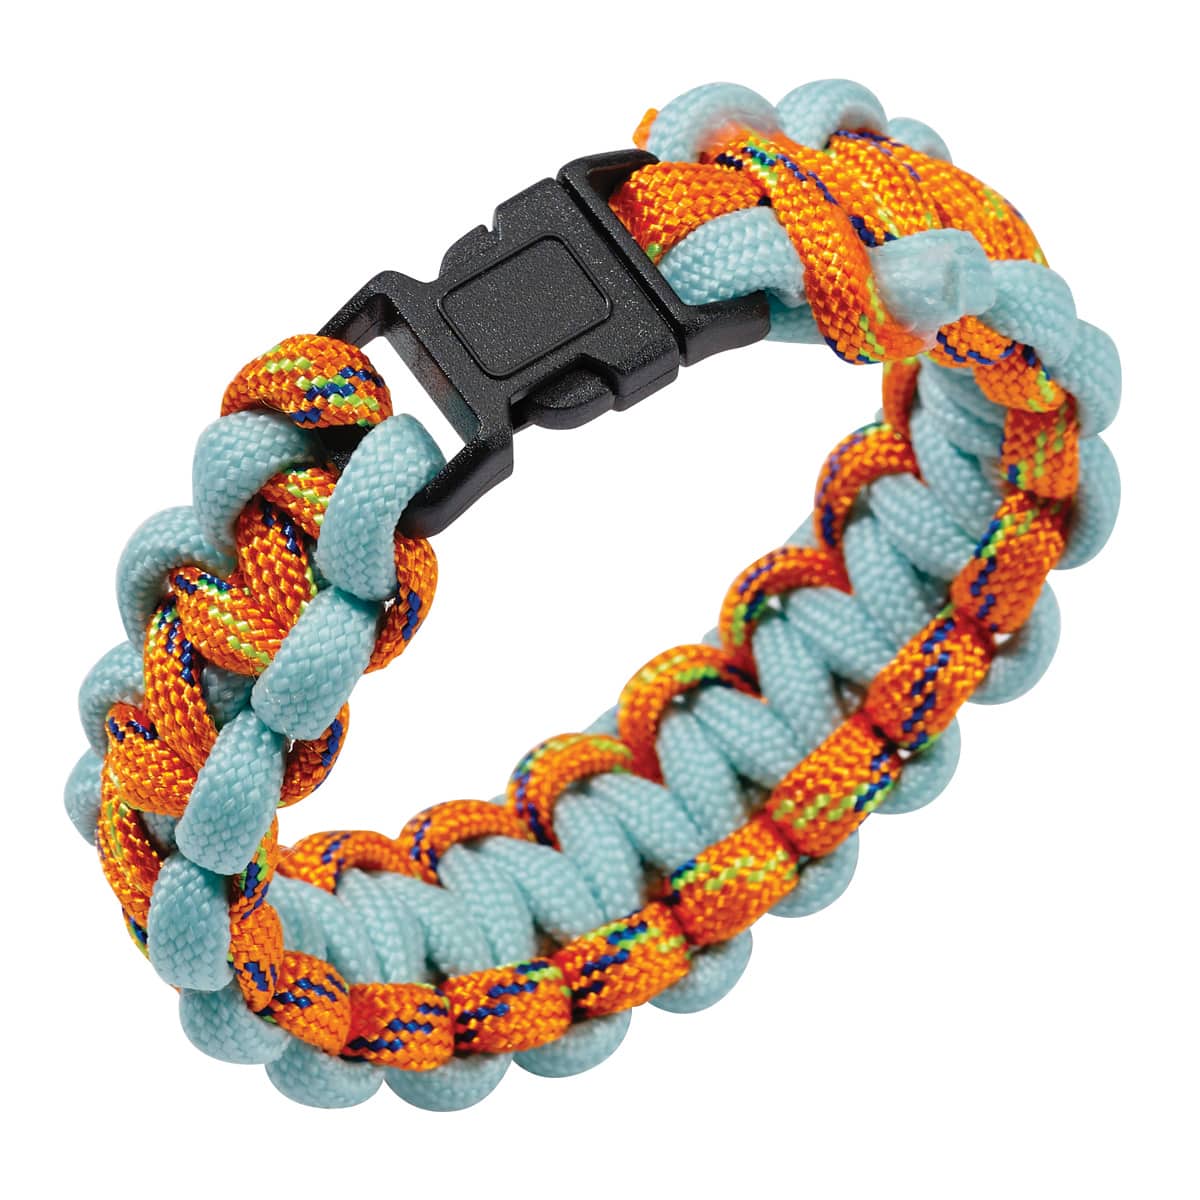 Creativity For Kids Glow-in-the-Dark Paracord Wristbands